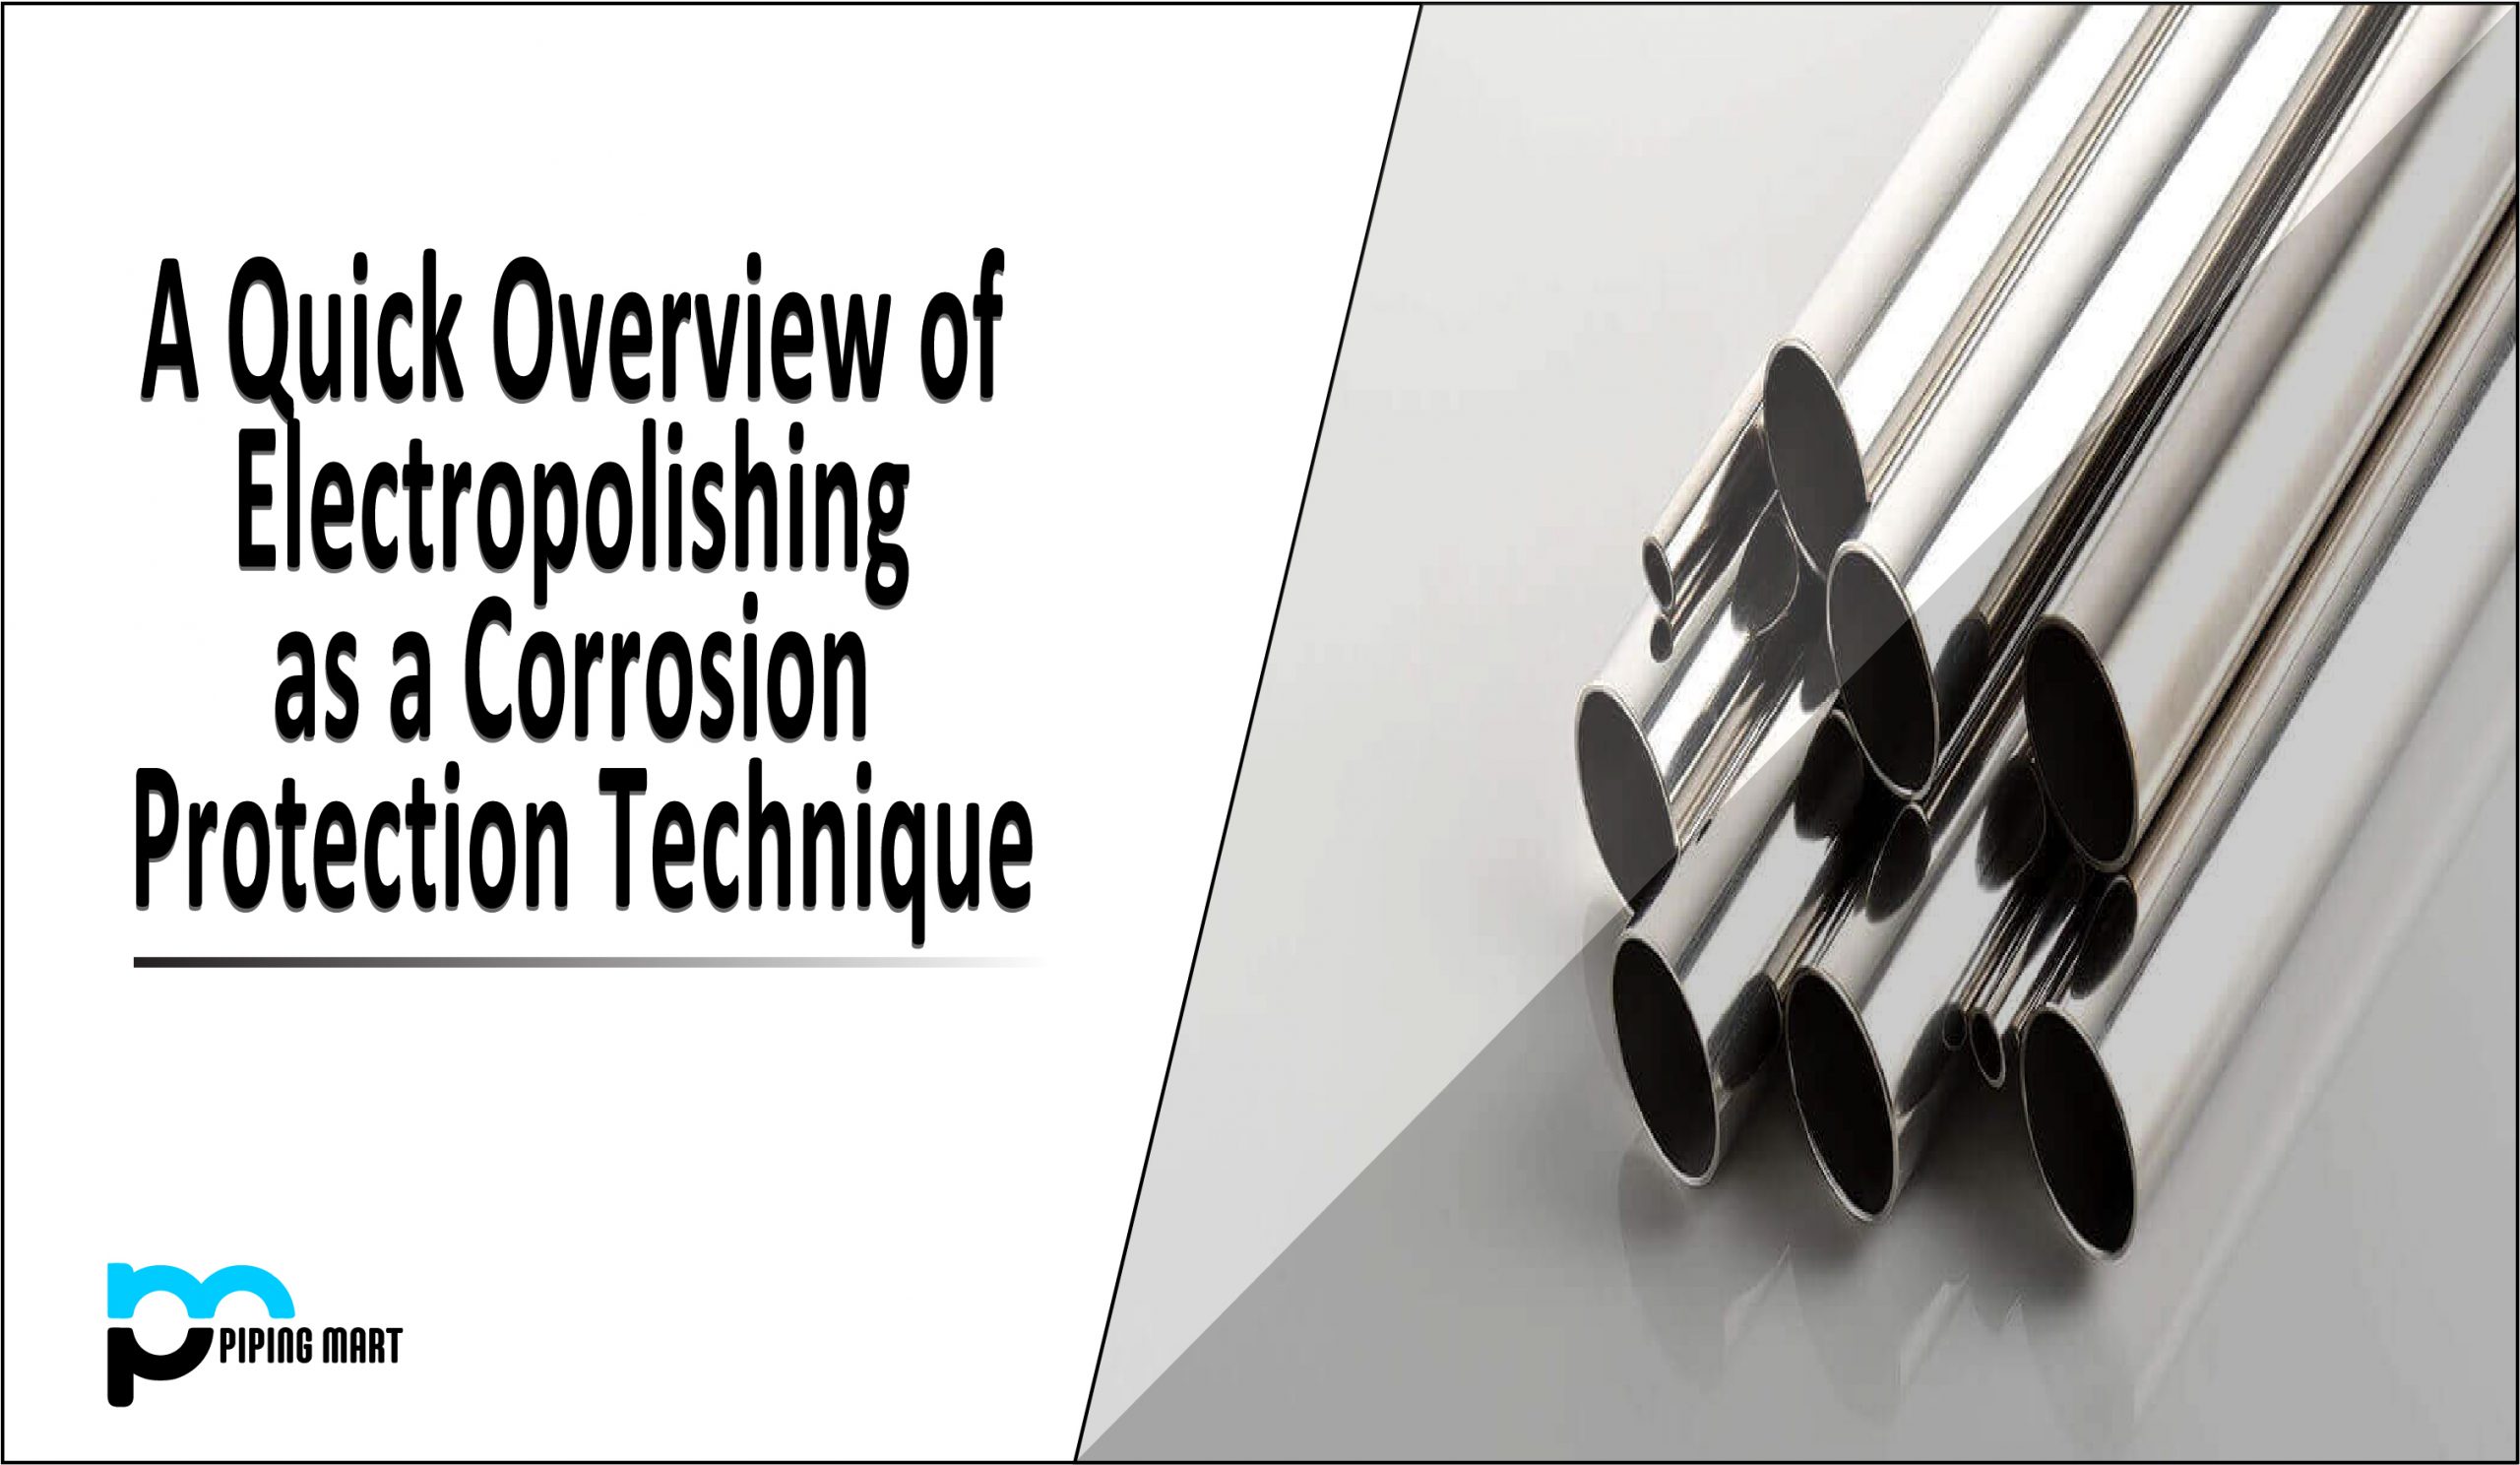 A Quick Overview of Electropolishing as a Corrosion Protection Technique